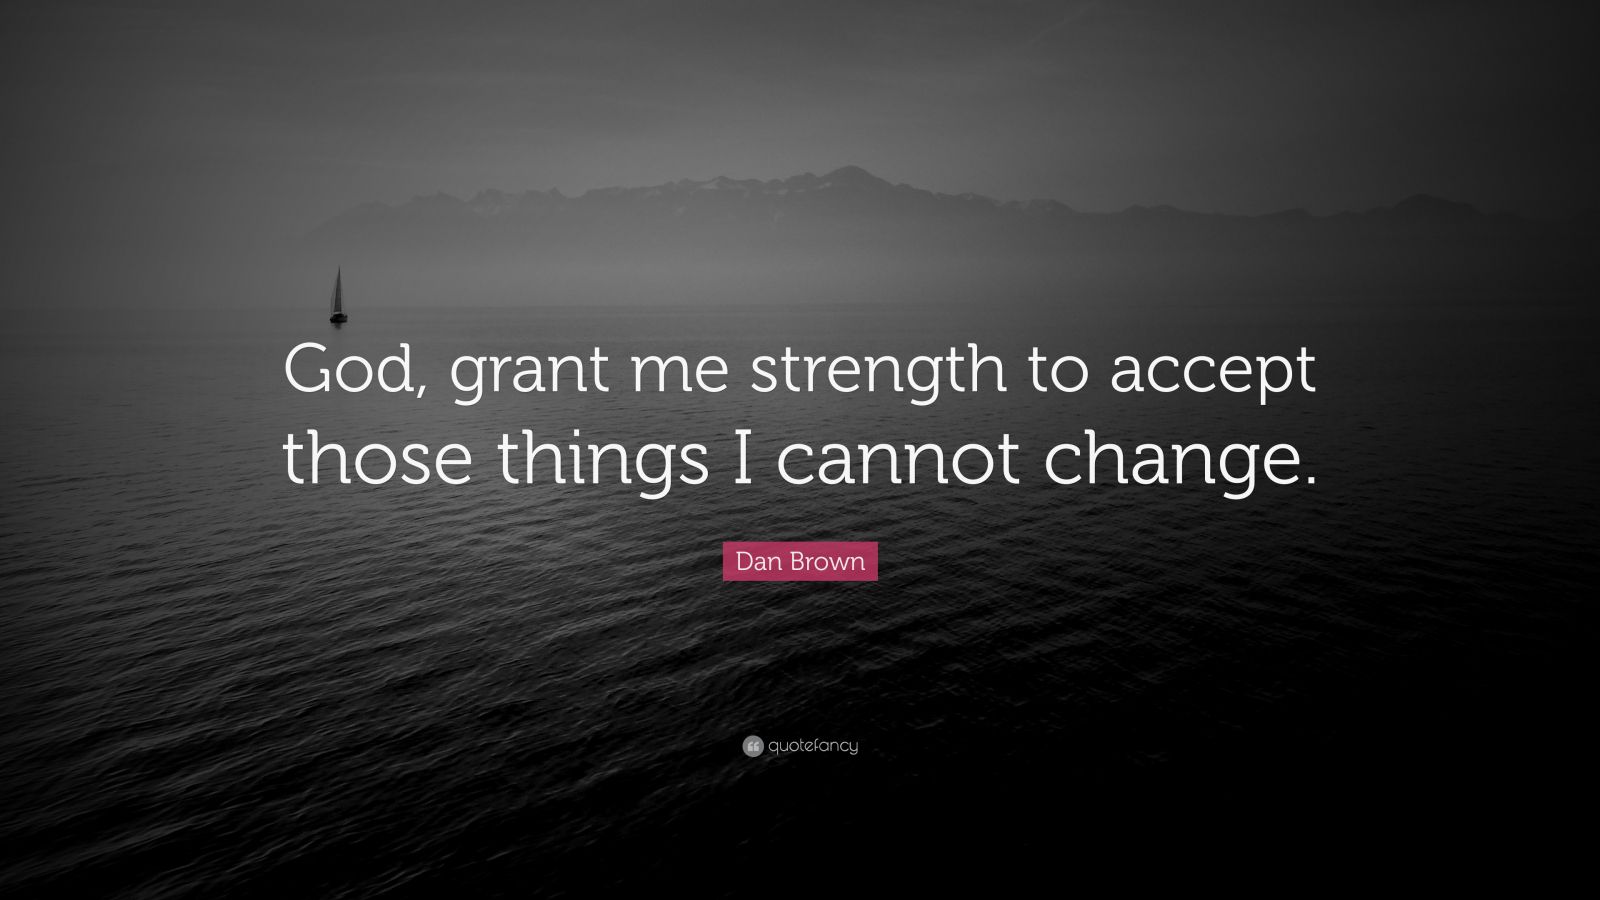 Dan Brown Quote: “God, grant me strength to accept those things I ...